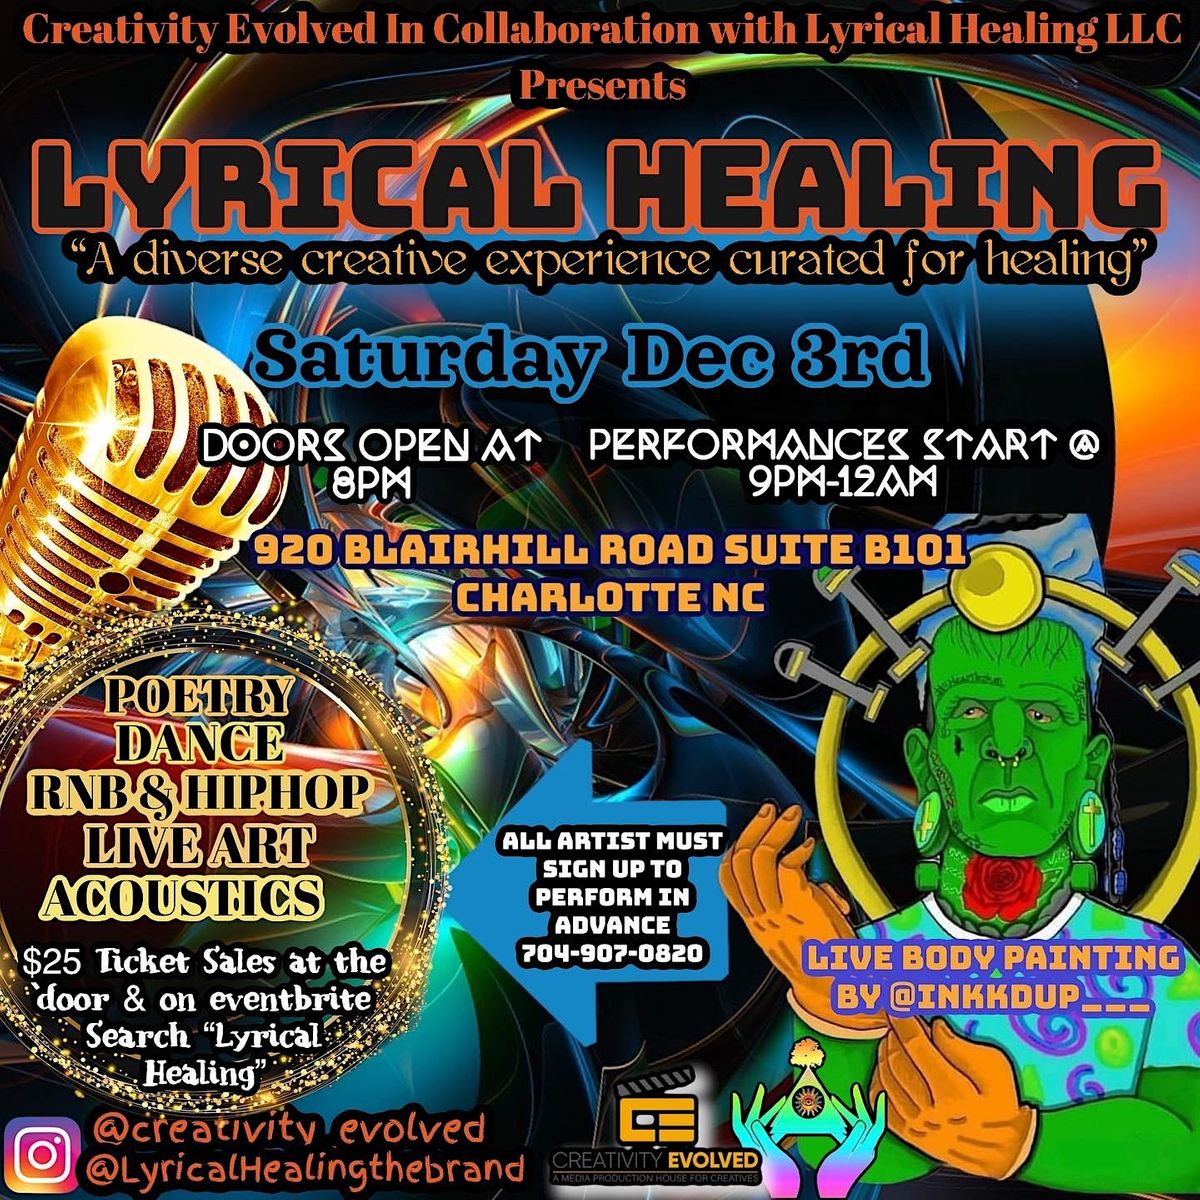 Lyrical Healing - A diverse creative experience curated for healing